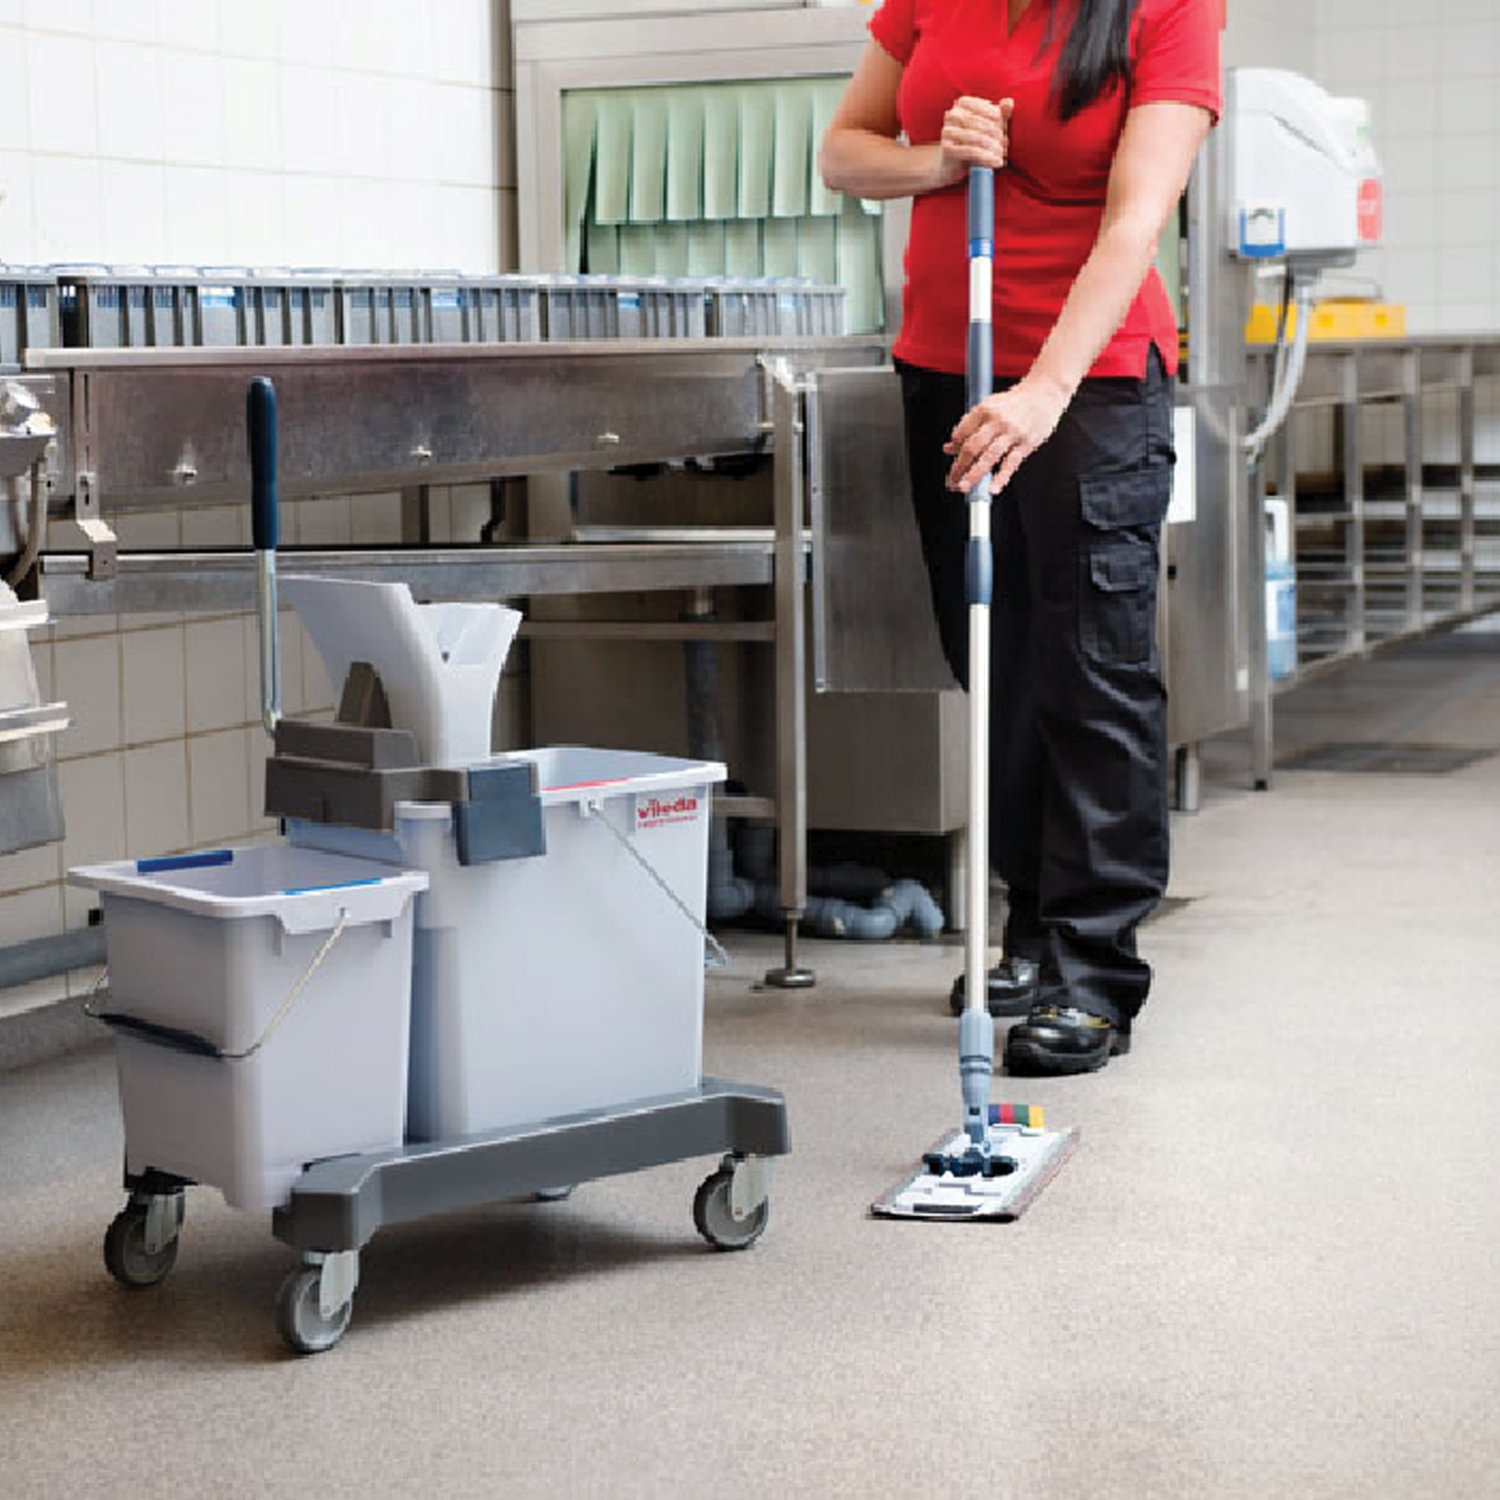 Ranking of the best cleaning carts for 2022